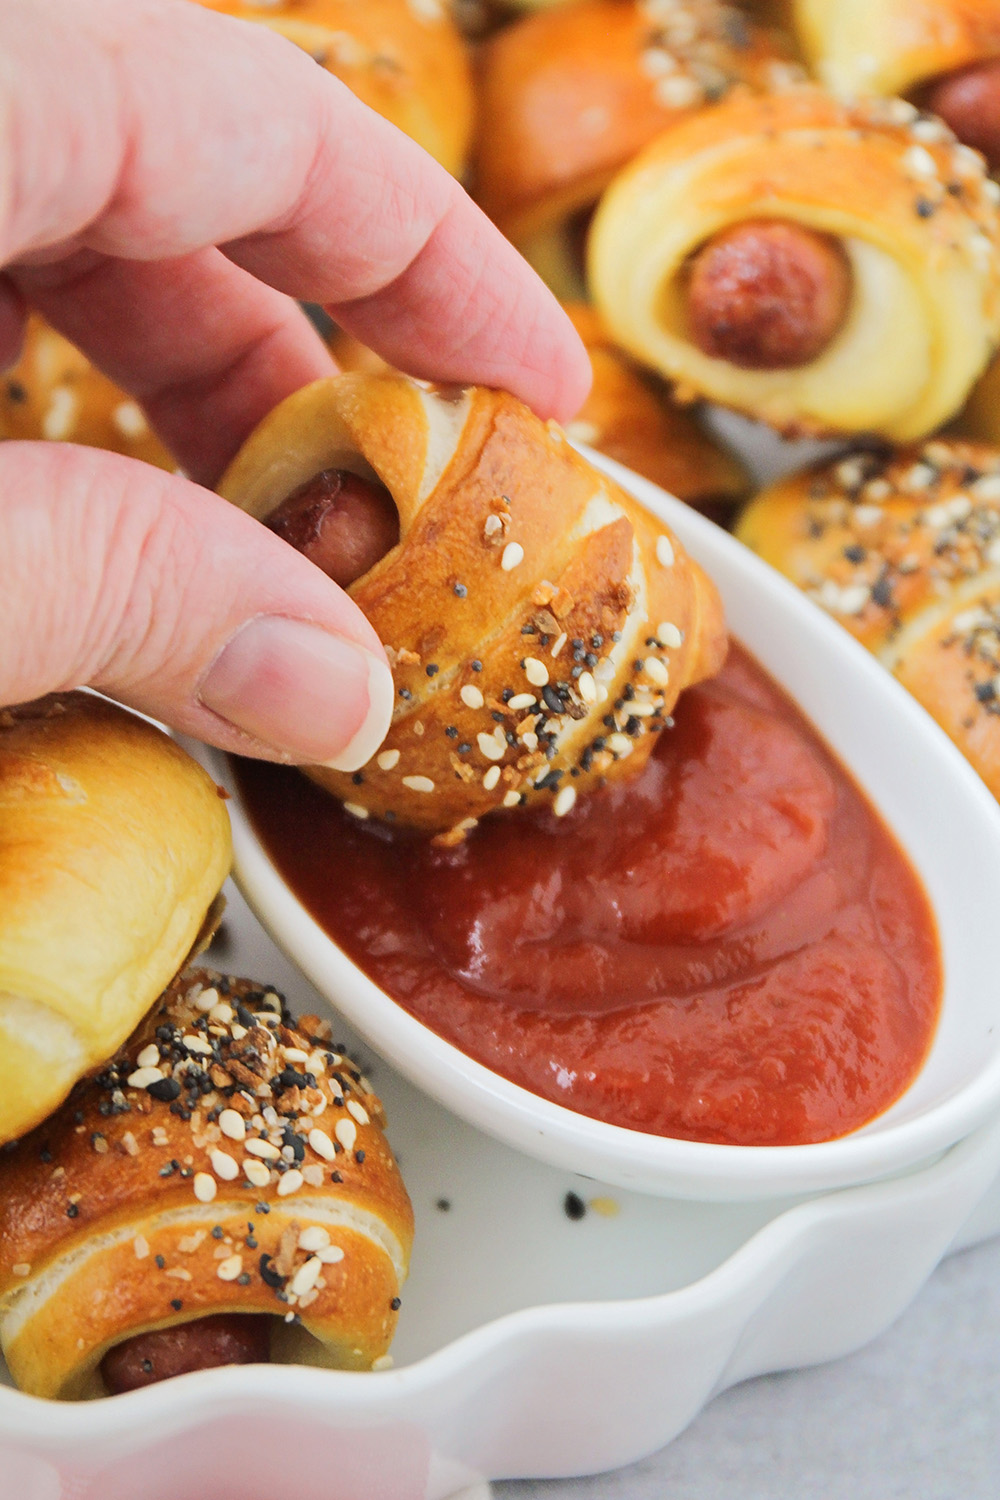 These everything bagel pigs in a blanket are so adorable, and so tasty too! They're perfect for snacking, game day, or school lunch!